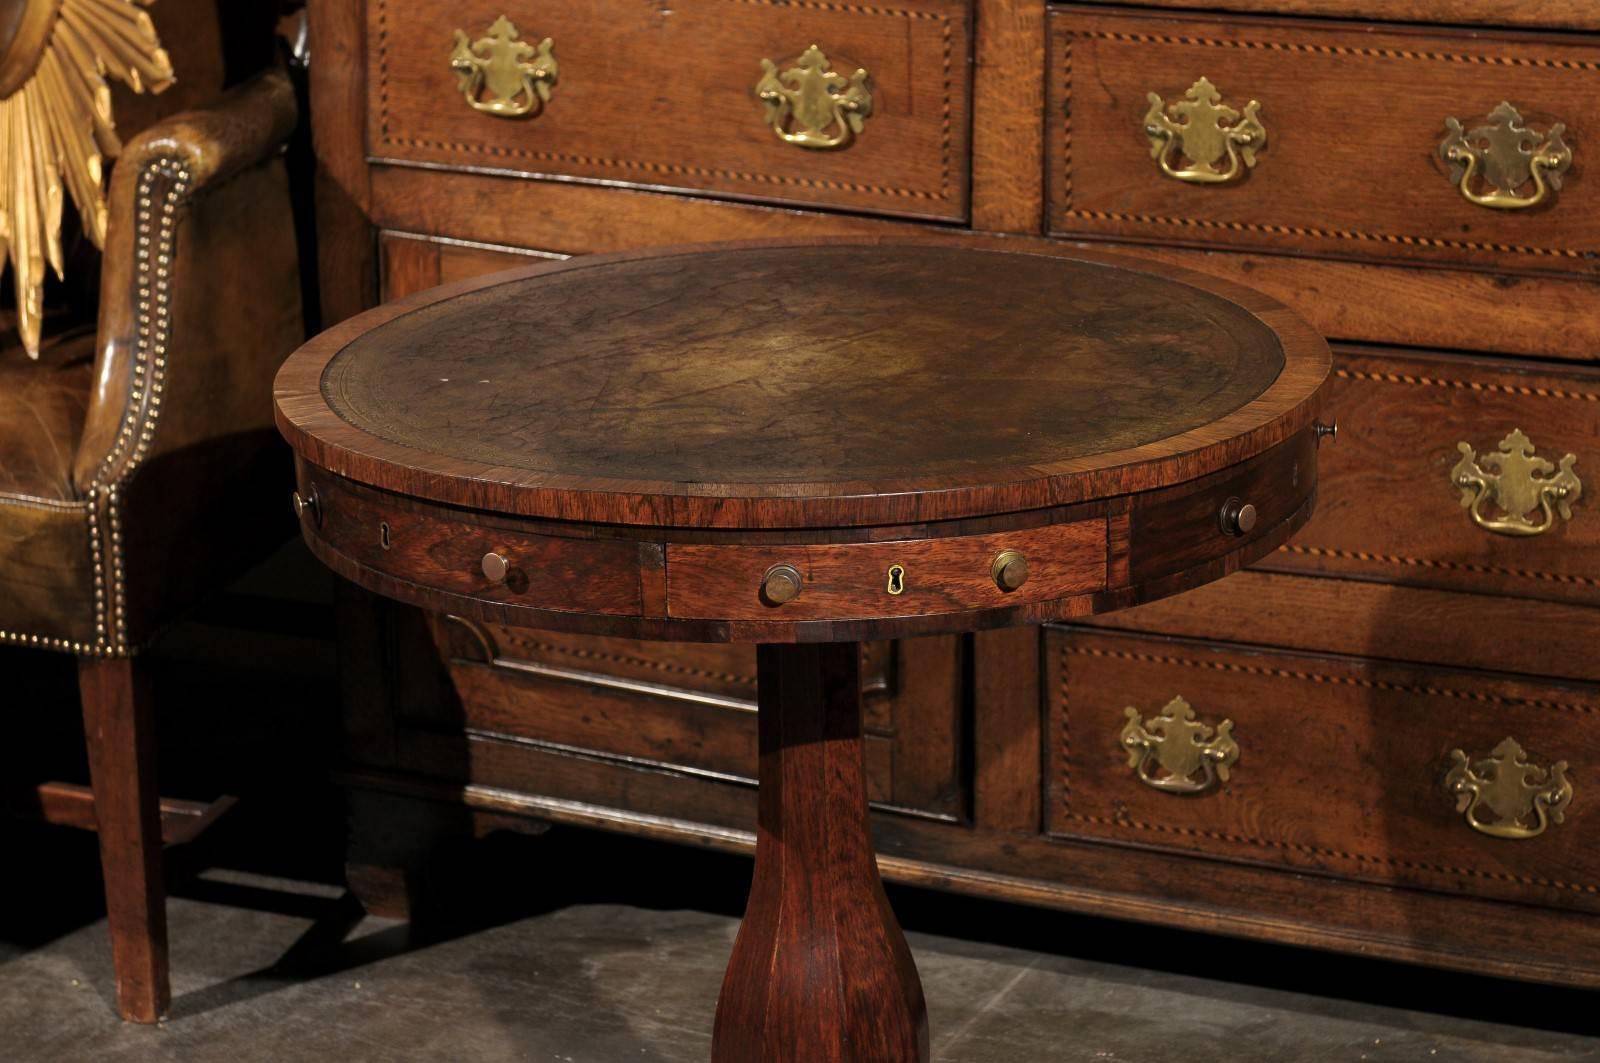 English 19th century Regency Leather Top Drum Table with Triangular Base 3